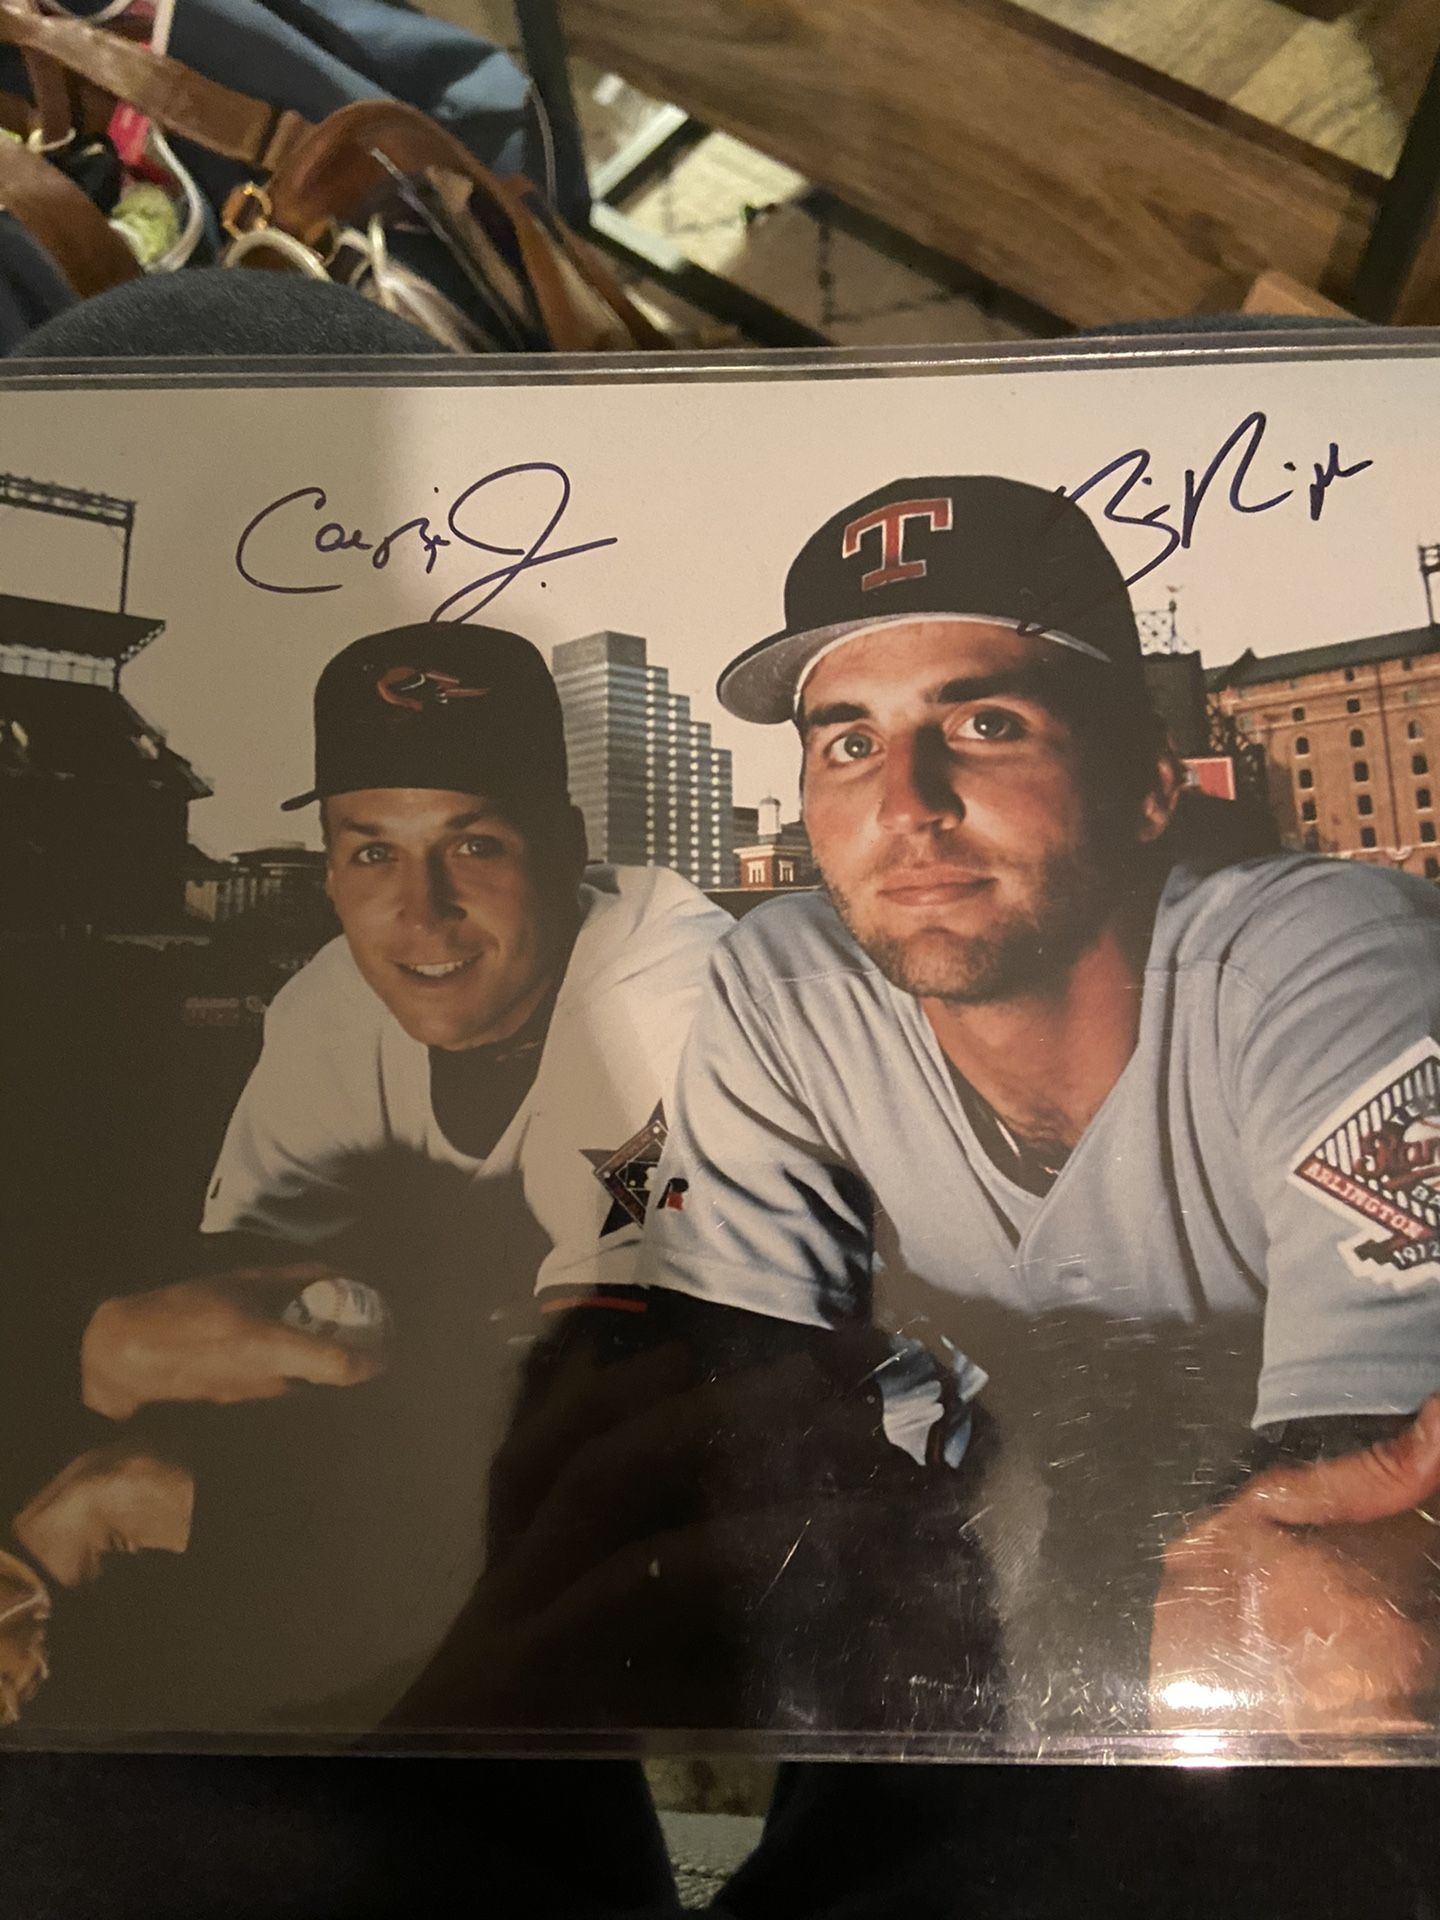 Cal and Billy autographed photo in protective sleeve 7 by 9